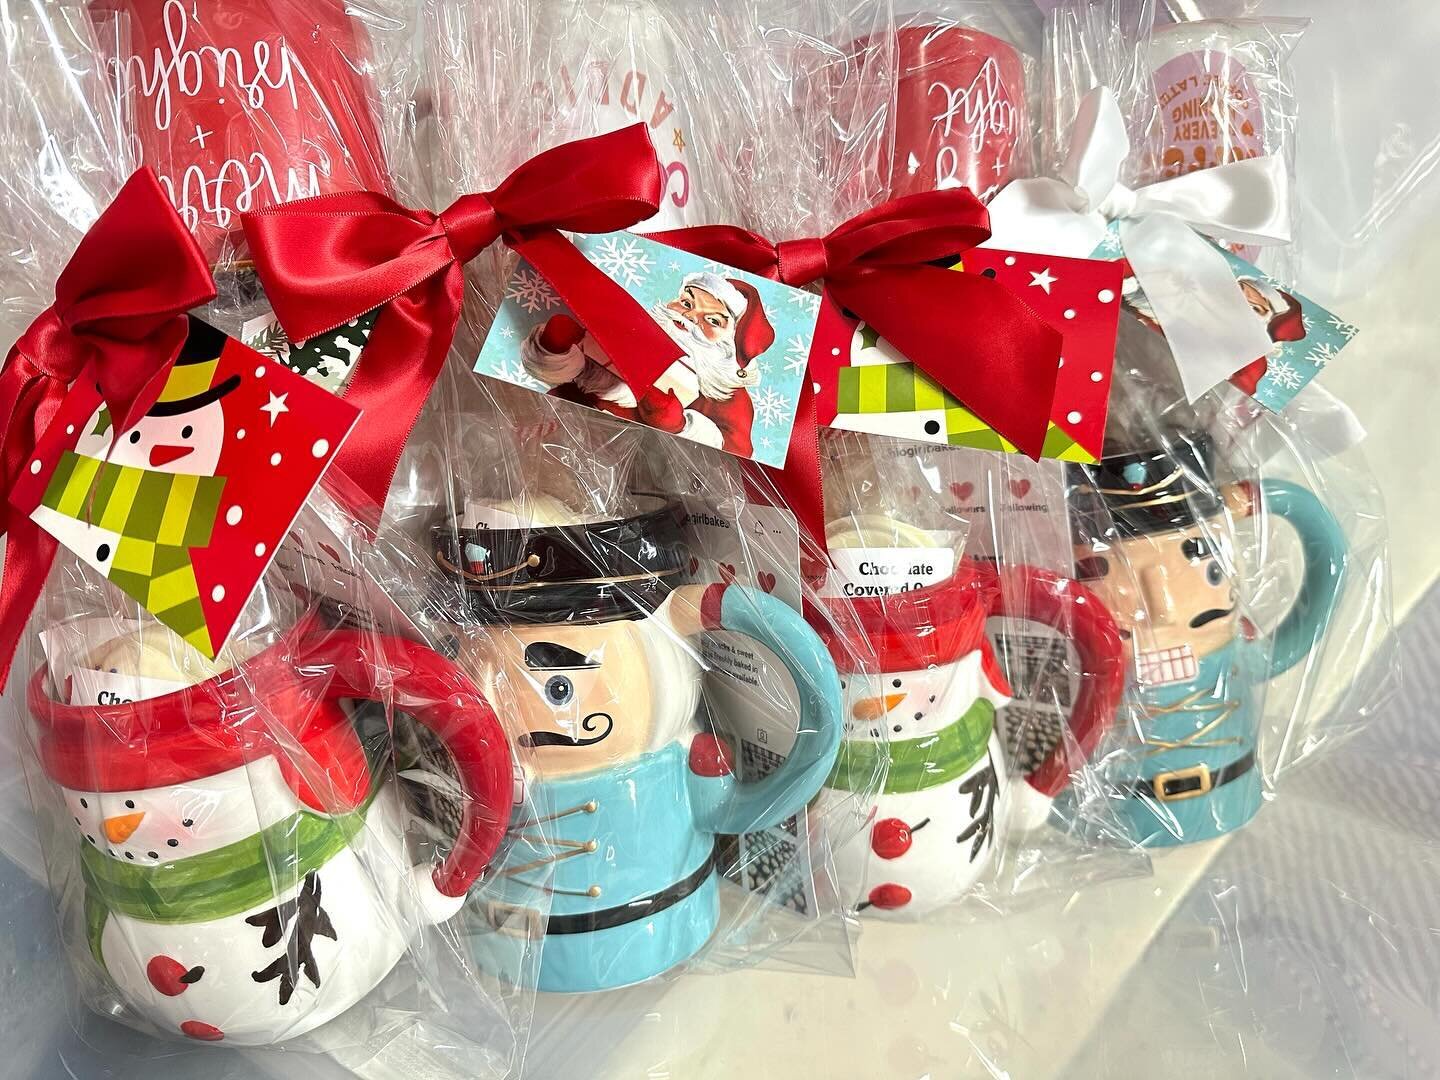 We&rsquo;re packing all of these cuties for the Hillard Hollyfest Arts &amp; Crafts Show this Saturday&mdash;9 am-3 pm. Let us help you check some things off your holiday gift list this year! 🎁🎄🎅🤶 @pboose_7 and I can&rsquo;t wait to see you there